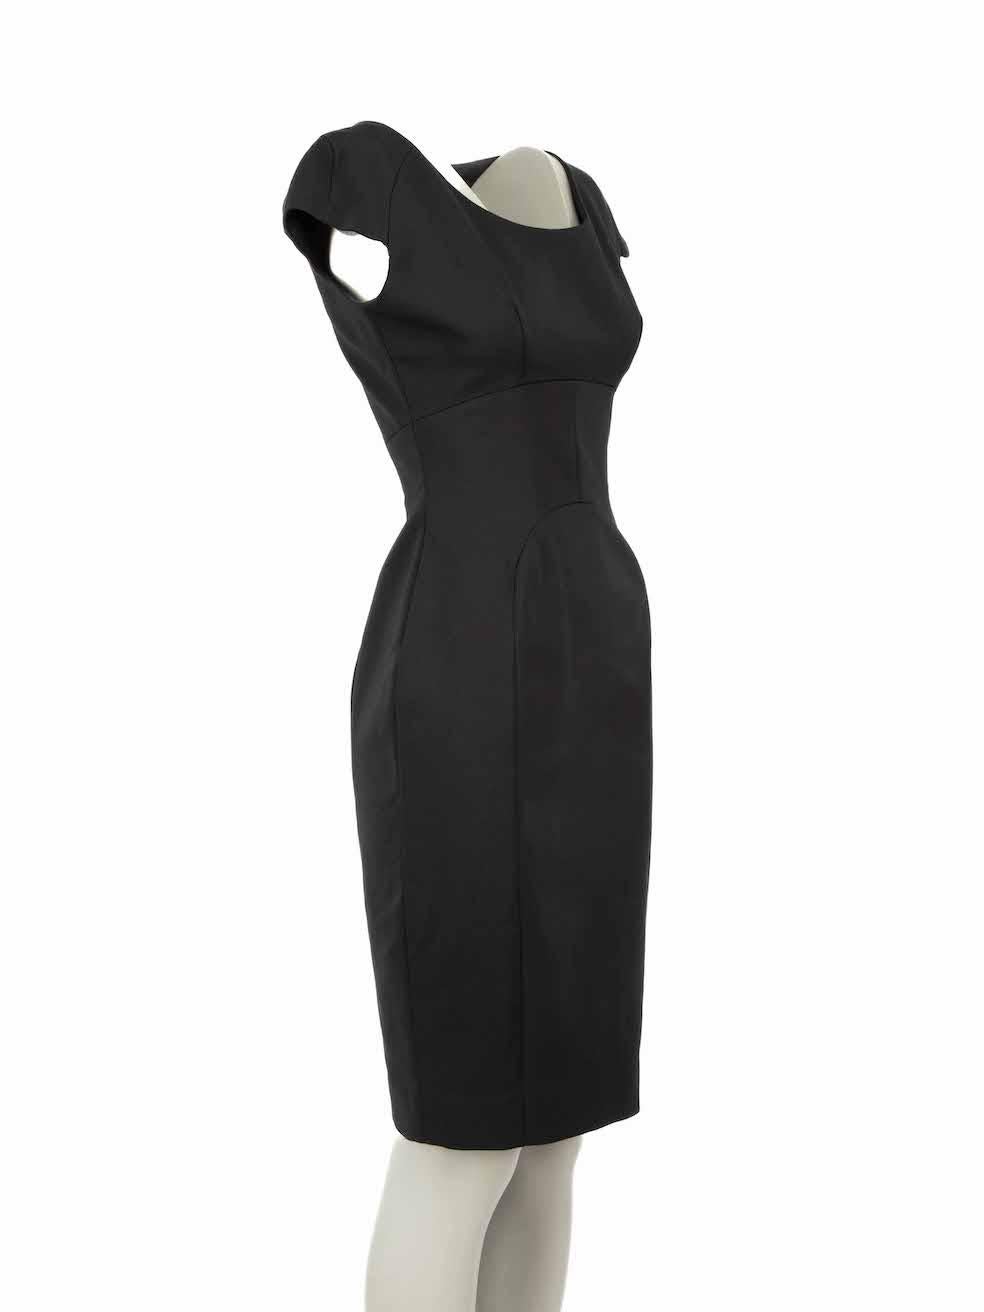 CONDITION is Very good. Hardly any visible wear to dress is evident on this used Victoria Beckham designer resale item.
 
Details
Black
Cotton
Bodycon dress
Knee length
Round neckline
Short cap sleeves
Back double zip closure
 
Made in